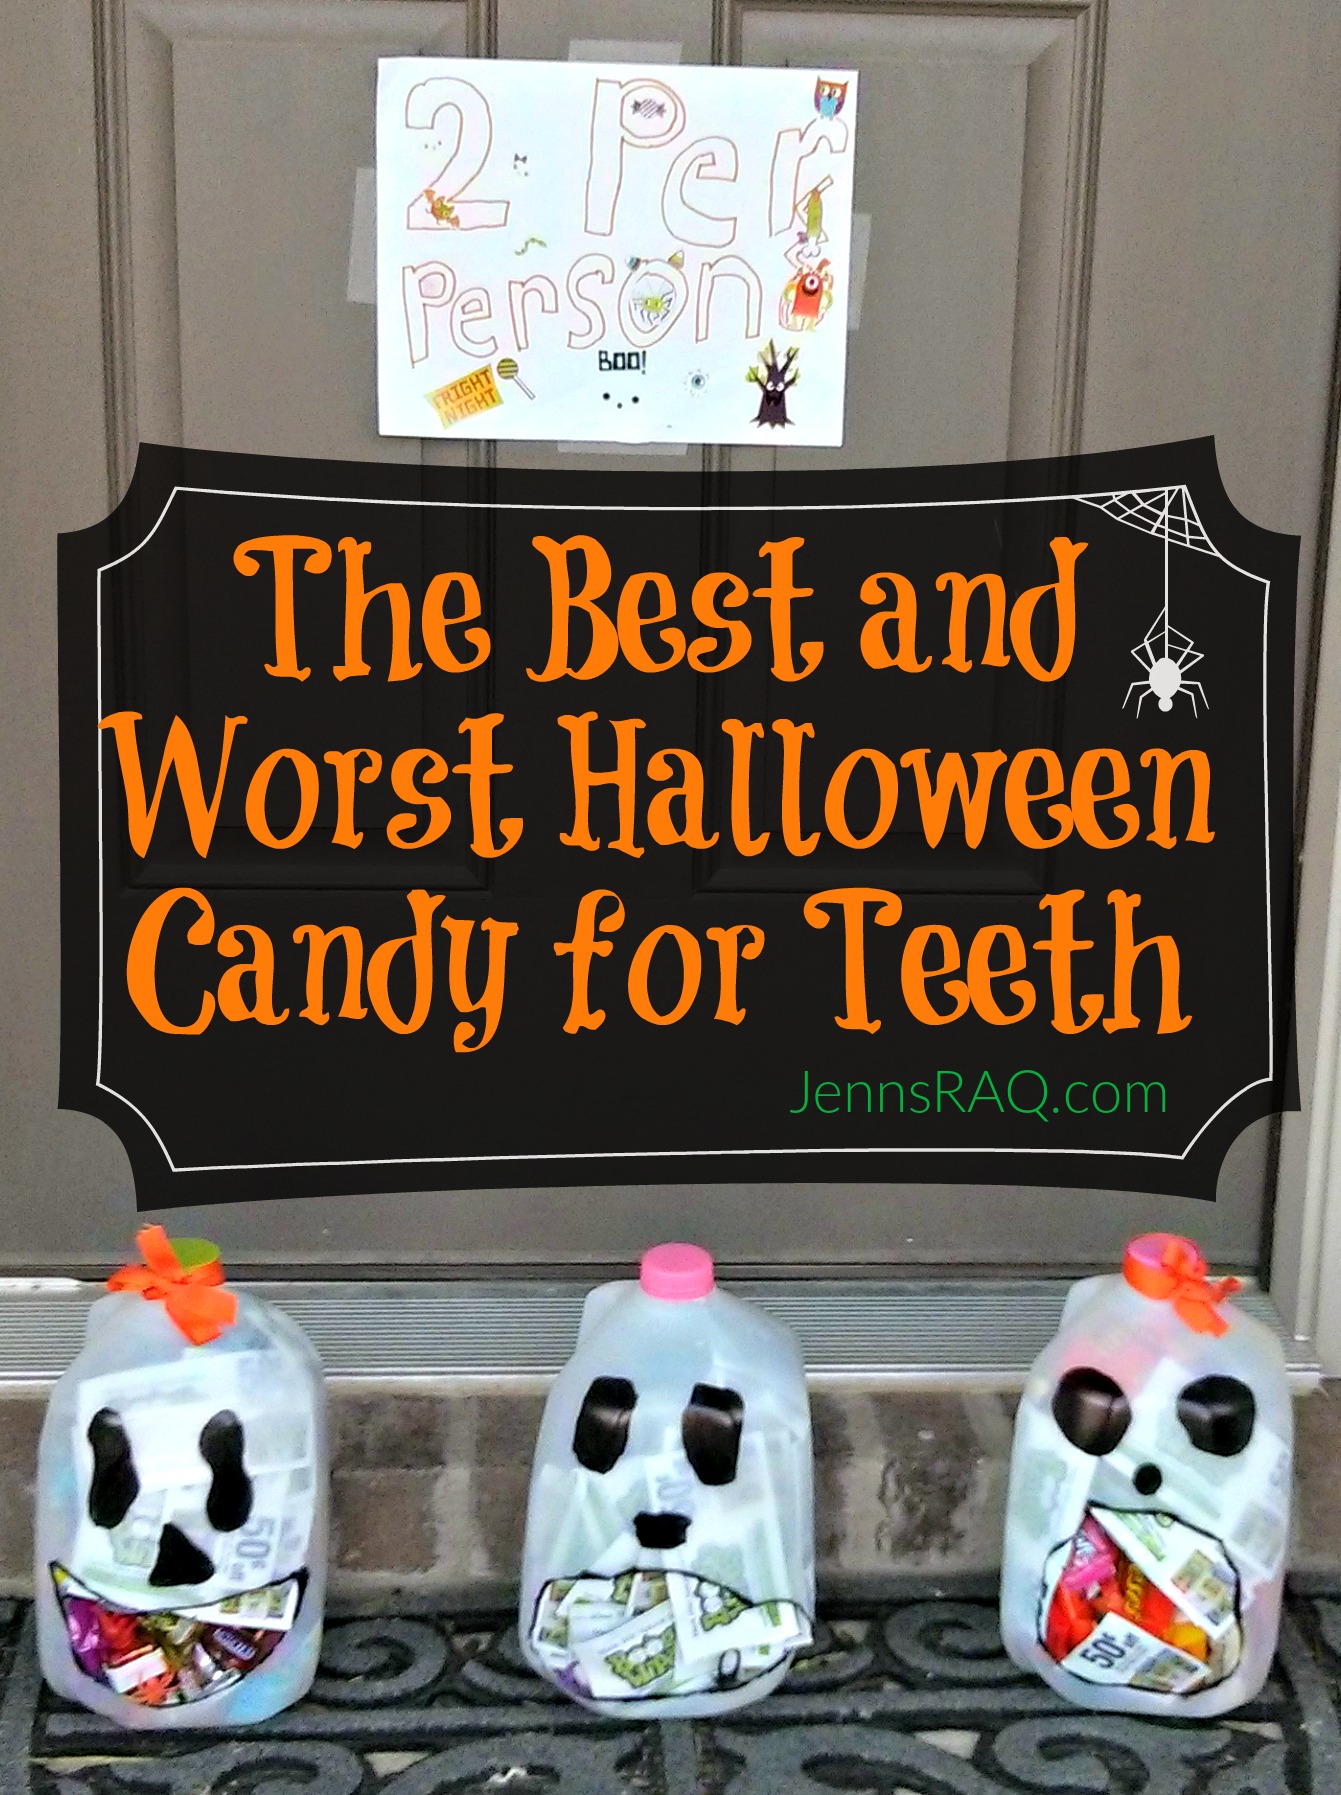 The Best and Worst Halloween Candy for Teeth - jennsRAQ.com